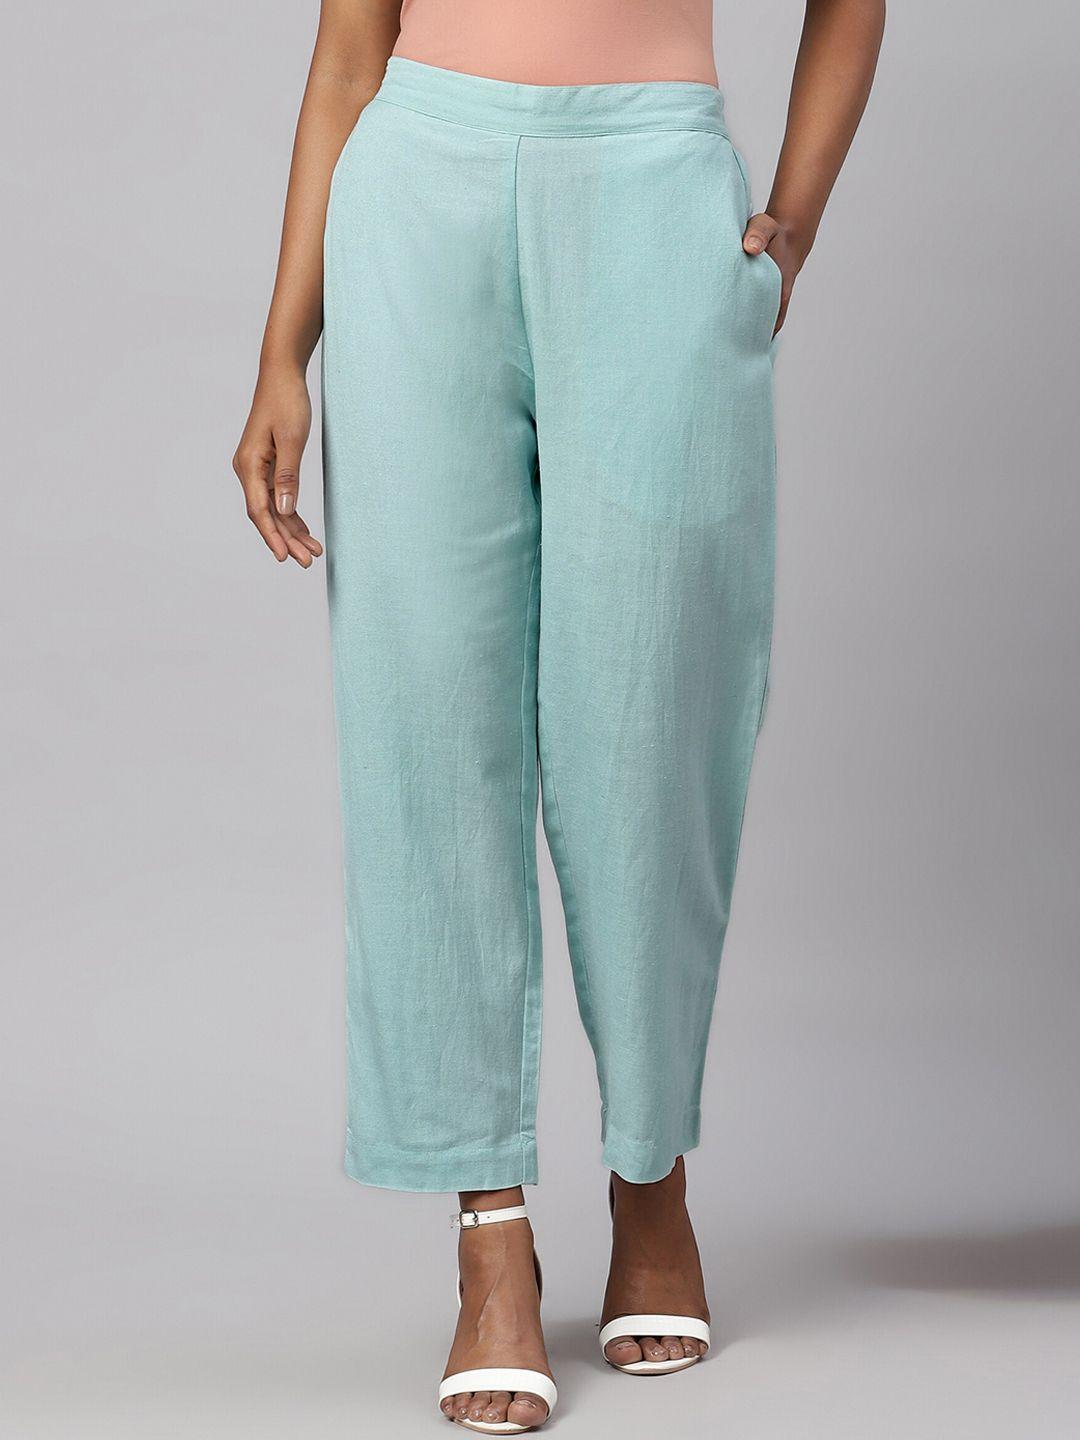 linen-club-woman-turquoise-blue-solid-straight-lounge-pants